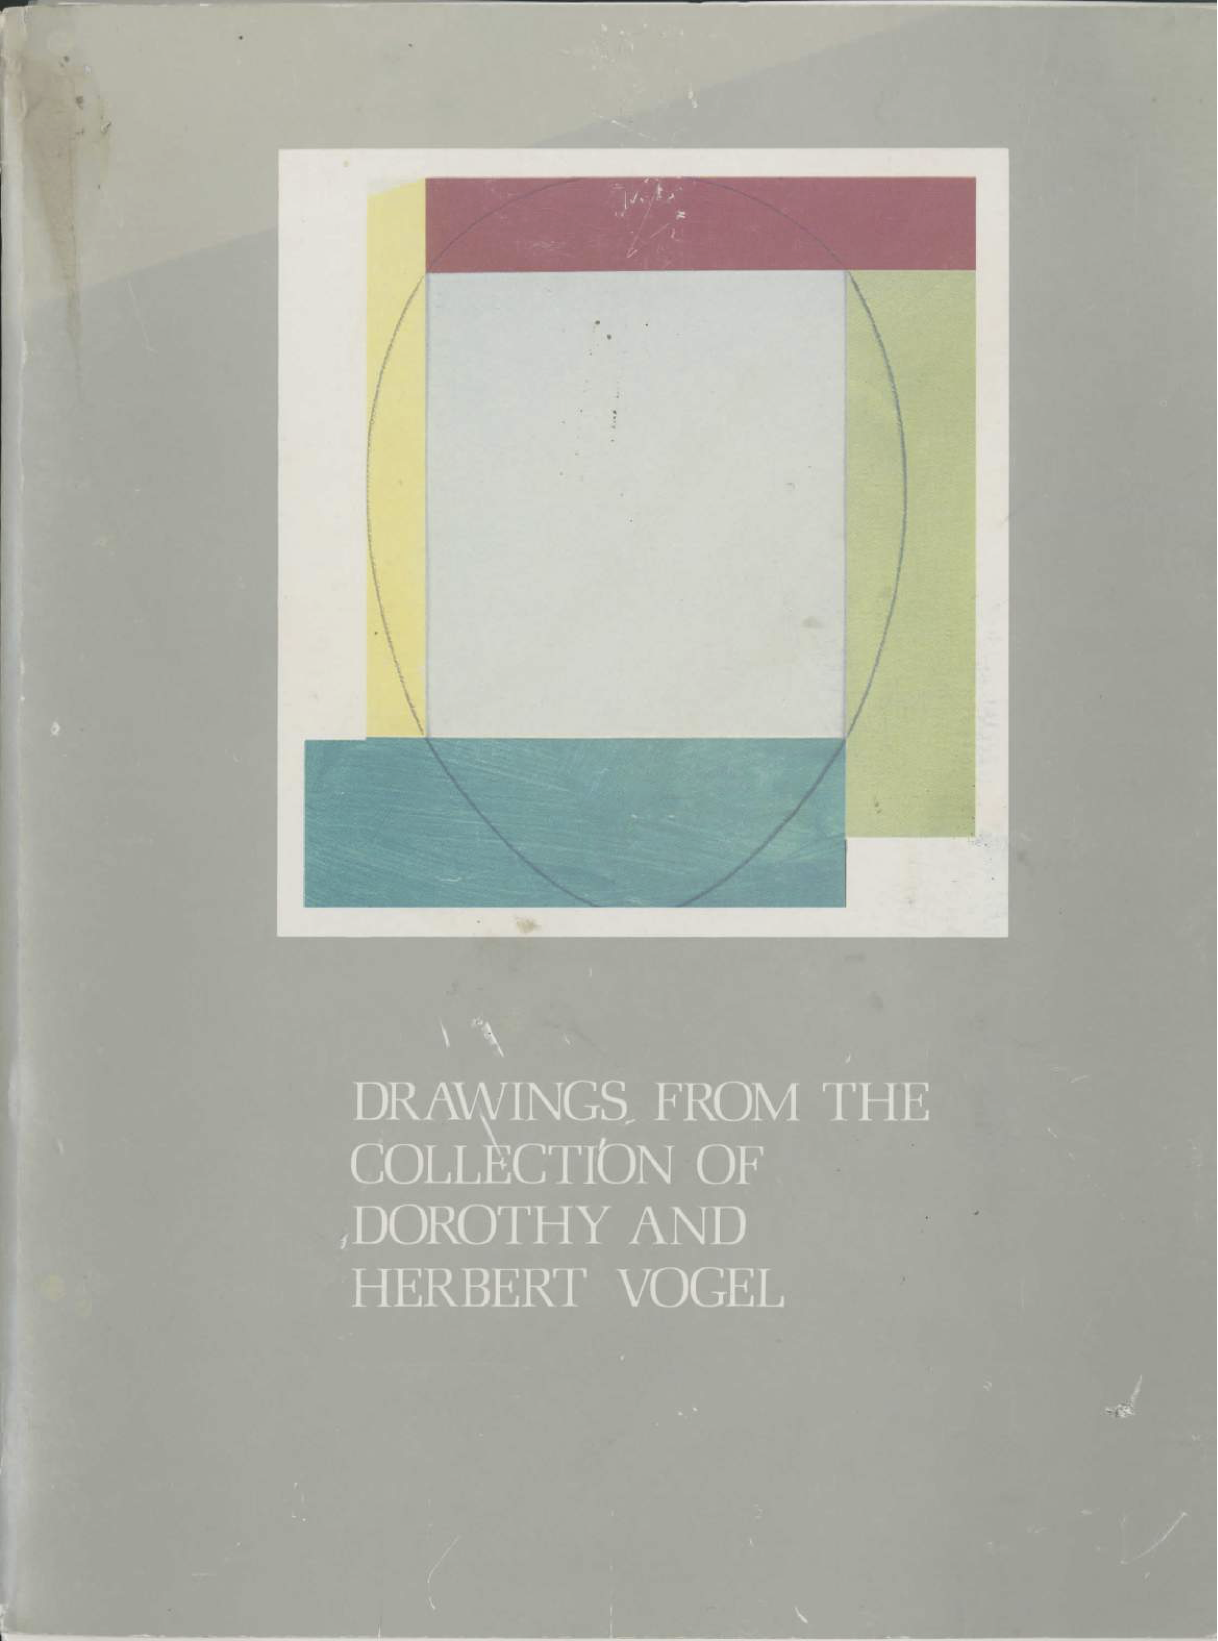 Randy Ploog and Vivan Endicott Barnett, Drawings from the Collection of Dorothy and Herbert Vogel, exhibition catalogue, 1986